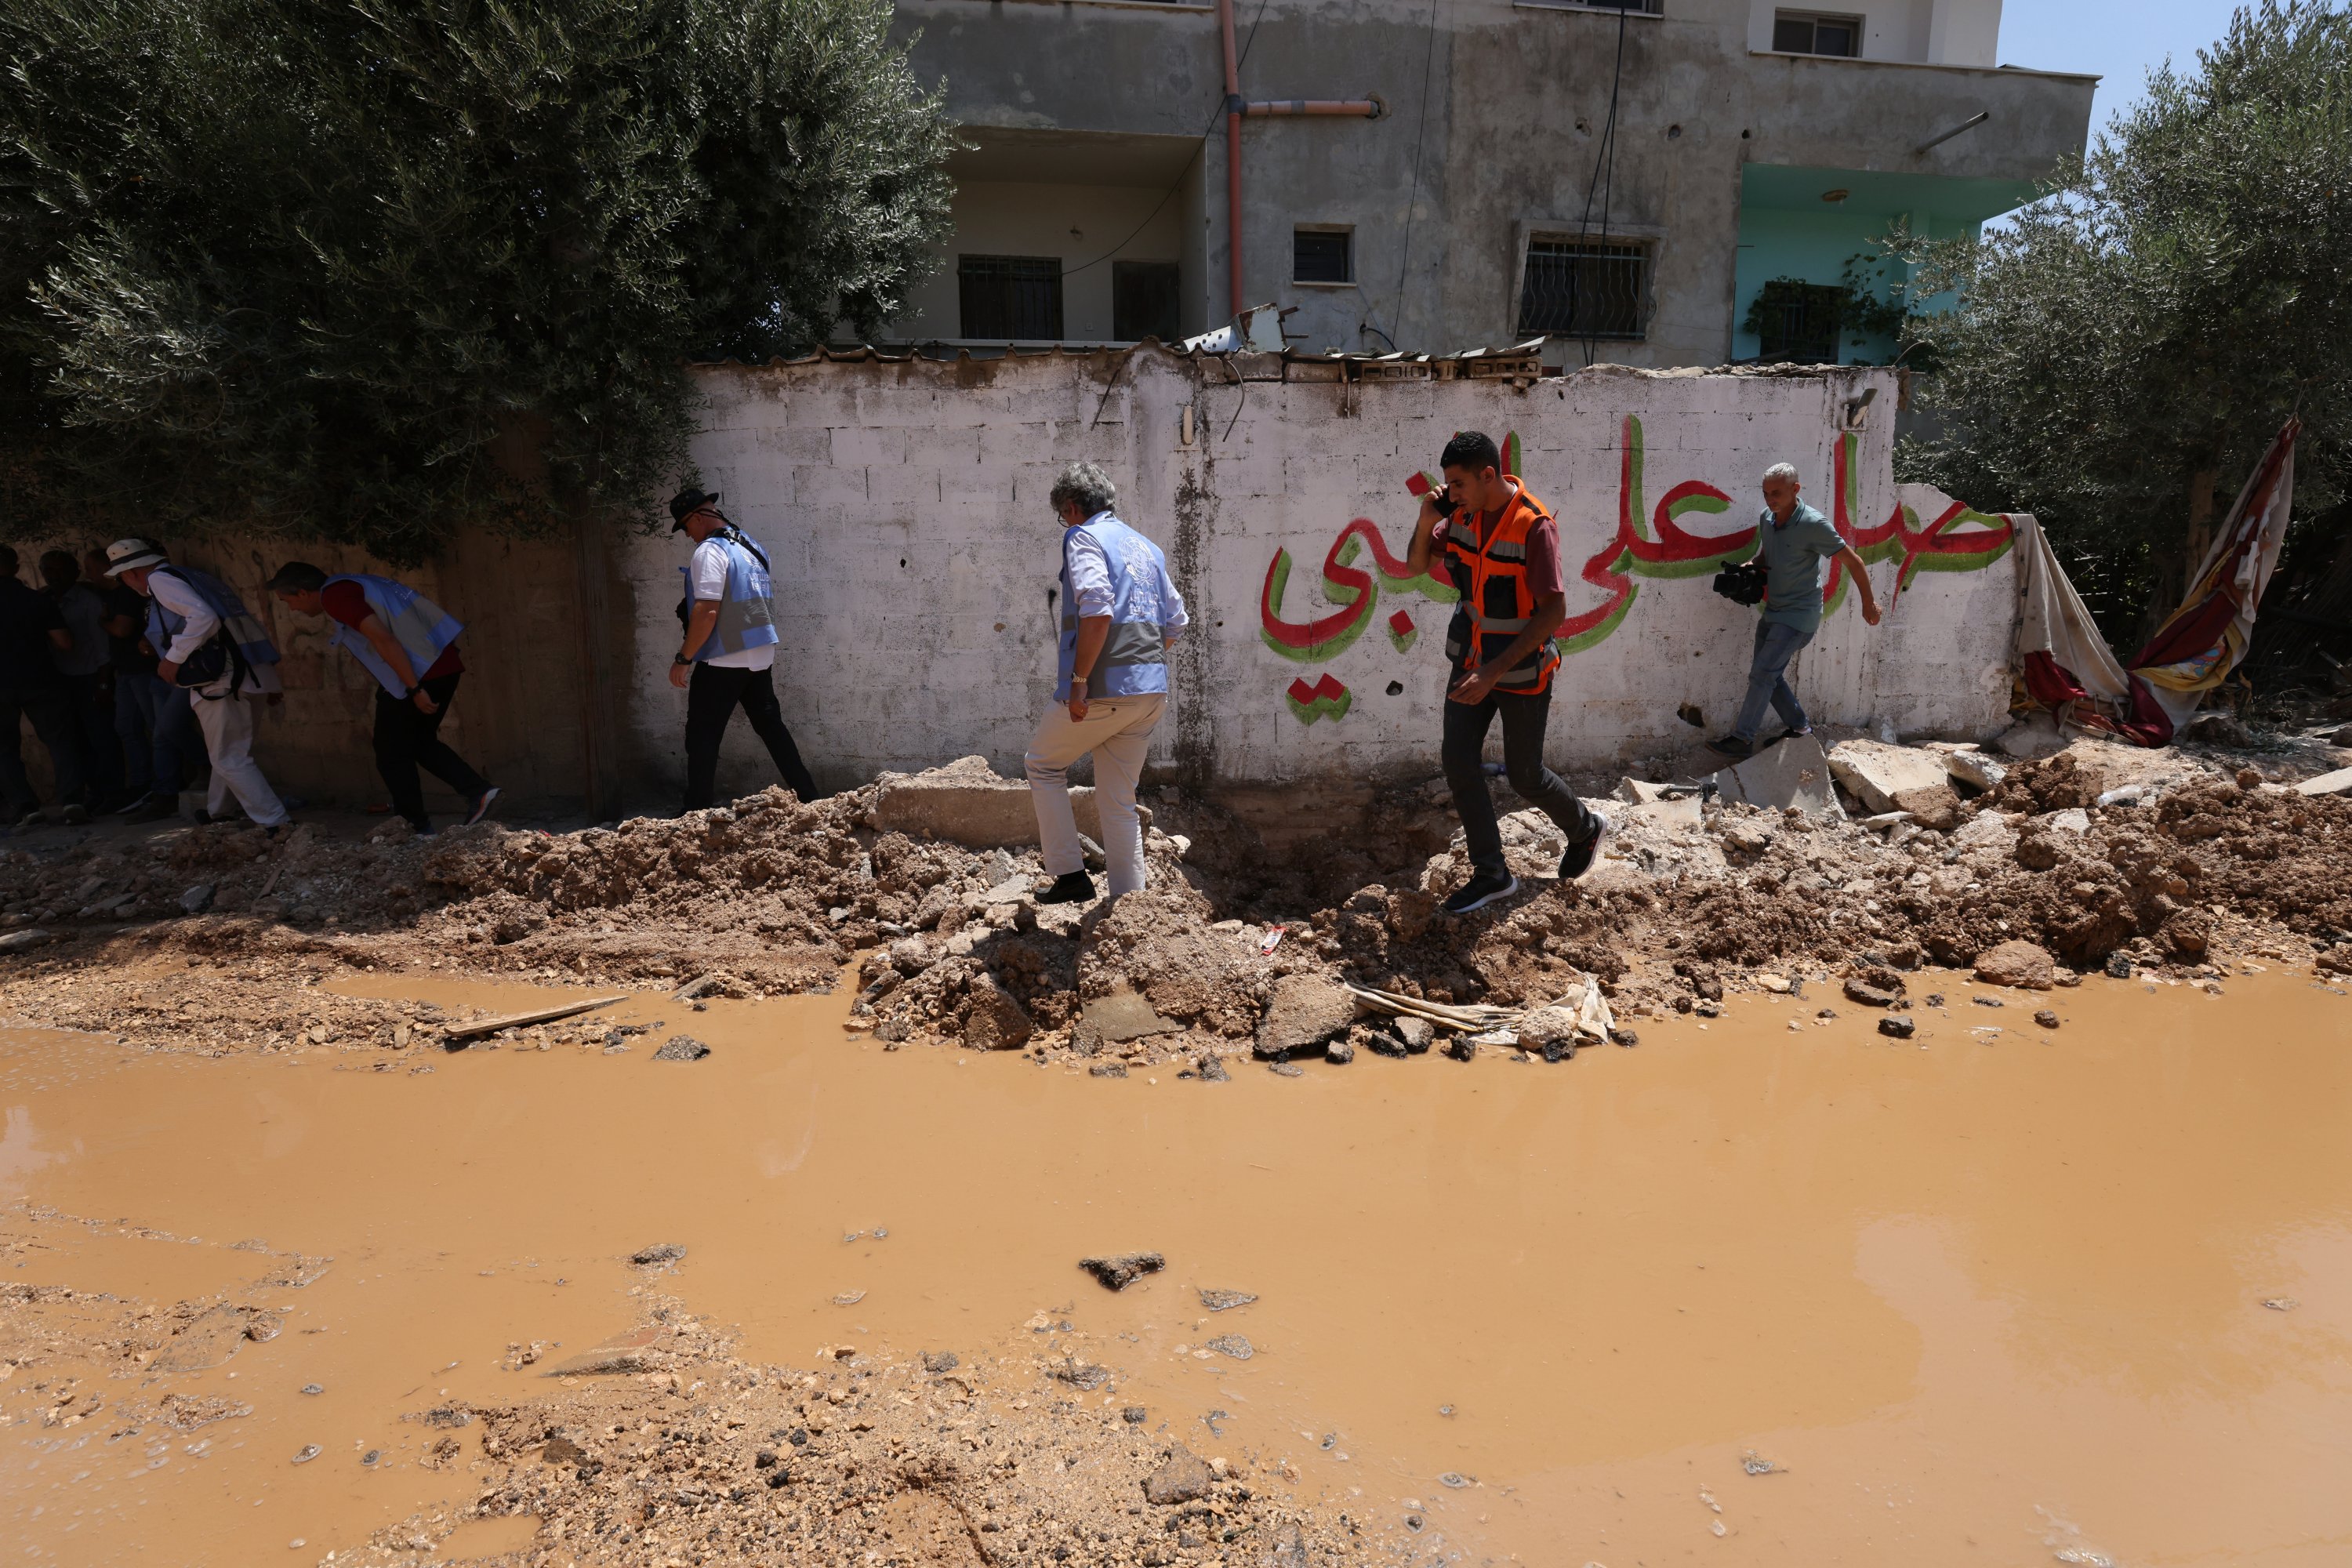 Members of the EU delegation inspect the damage at the Jenin refugee camp after an Israeli army raid, occupied West Bank, Palestine, July 8, 2023. (EPA Photo)